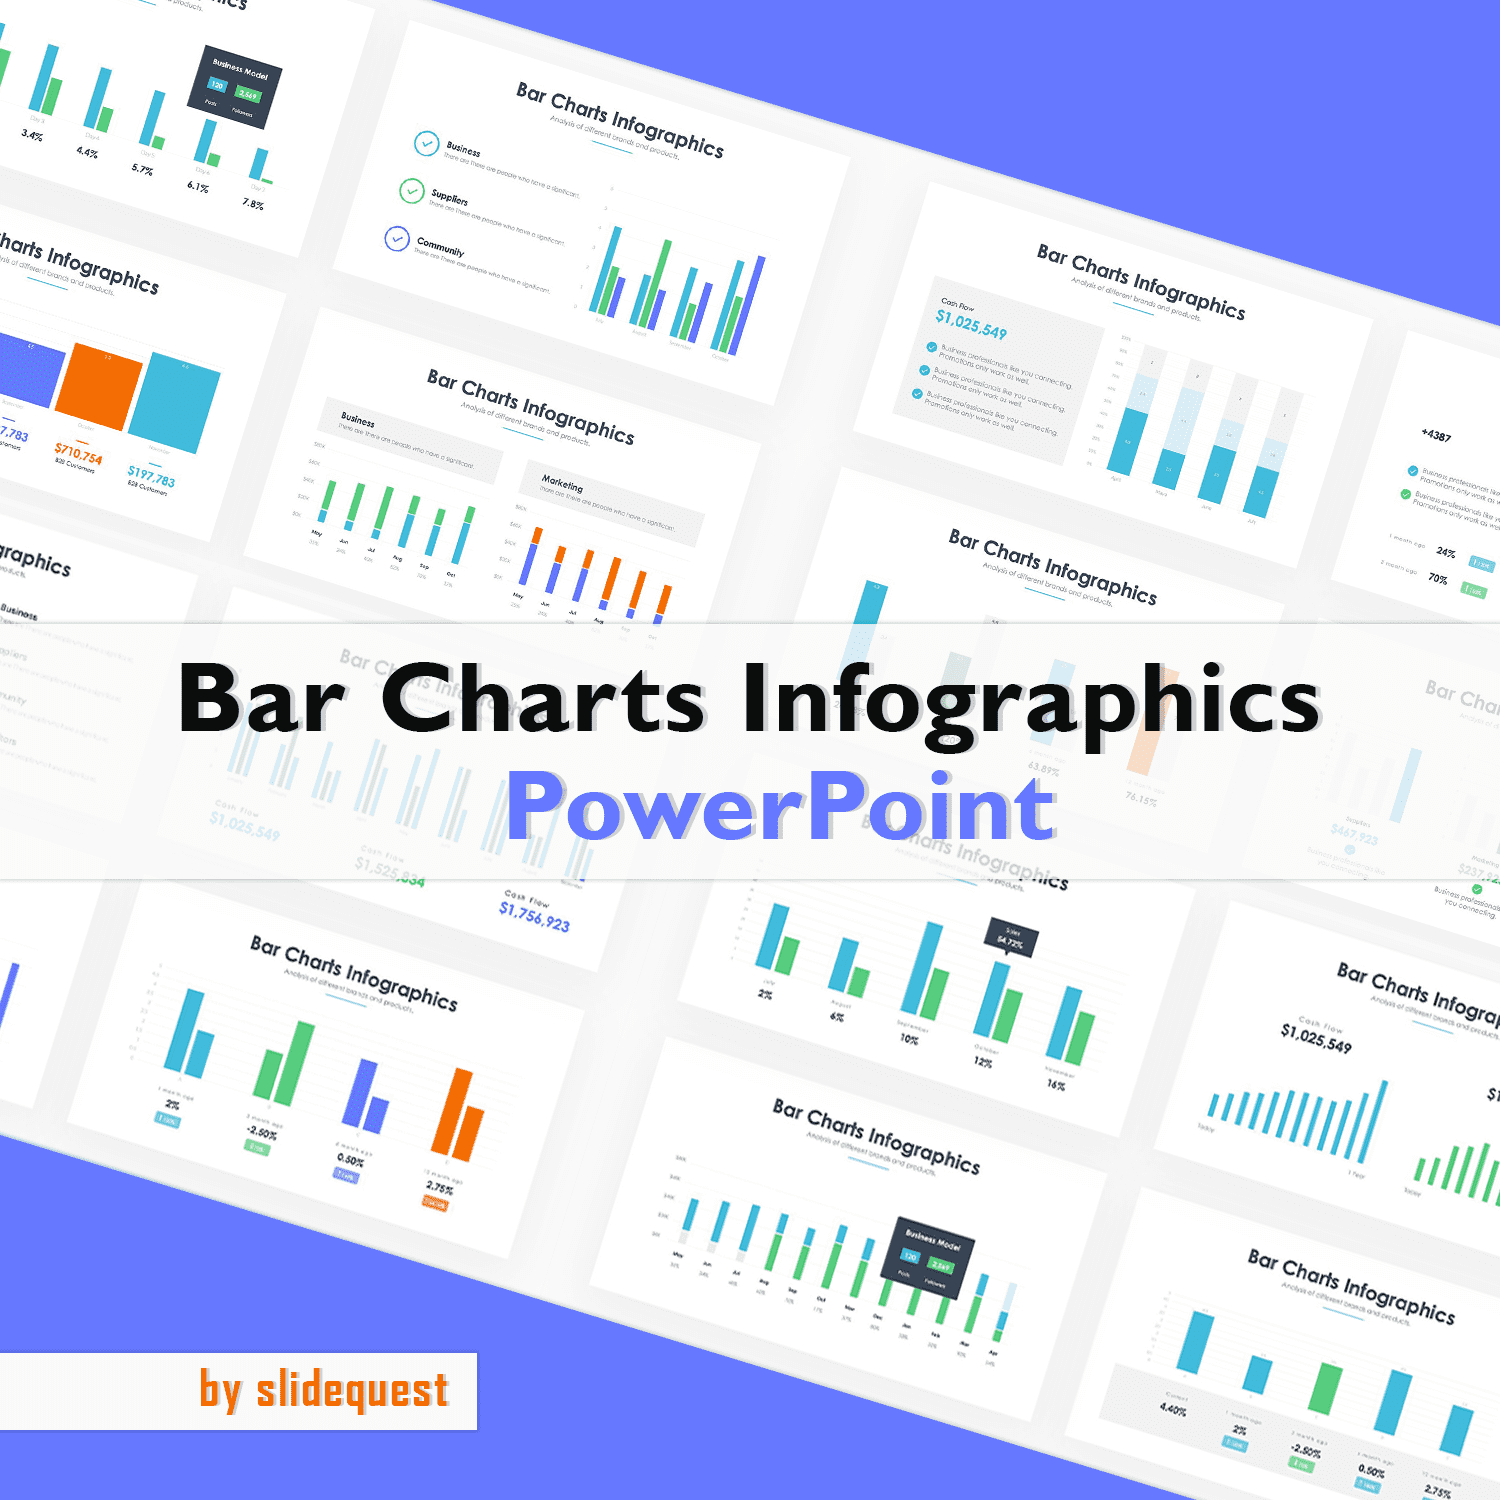 bar charts infographics powerpoint.